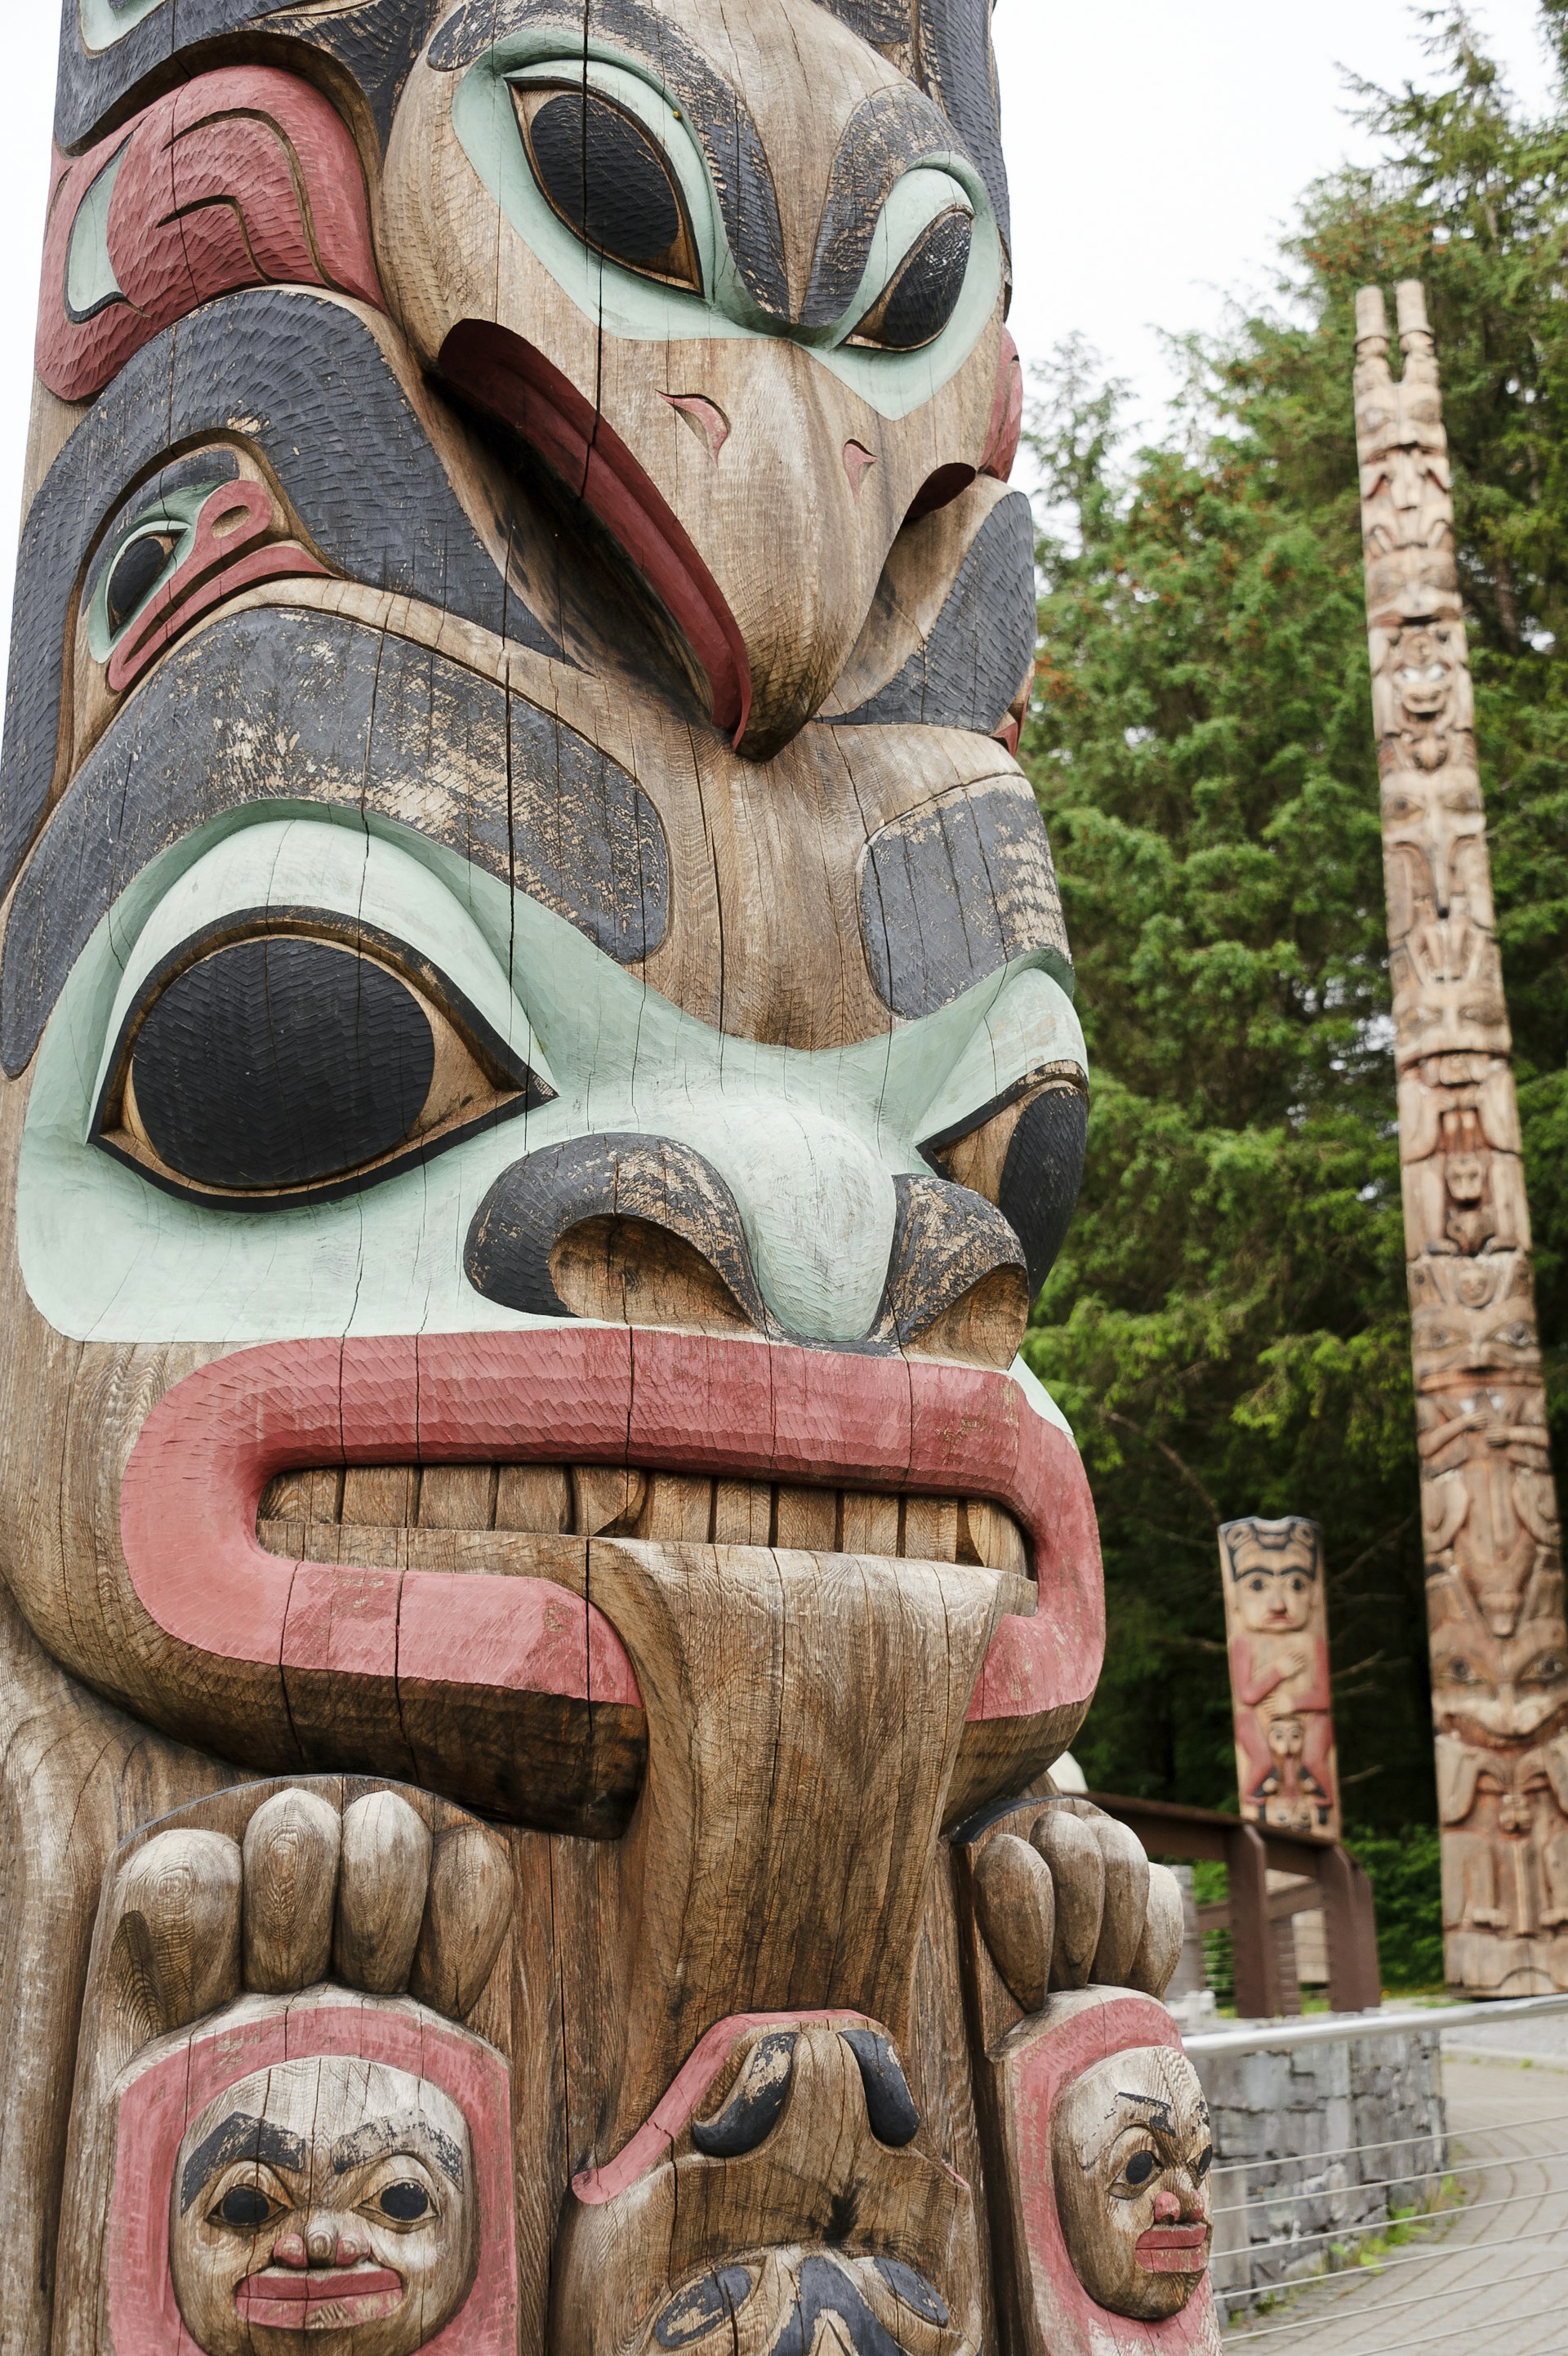 A wooden totem pole with carved faces